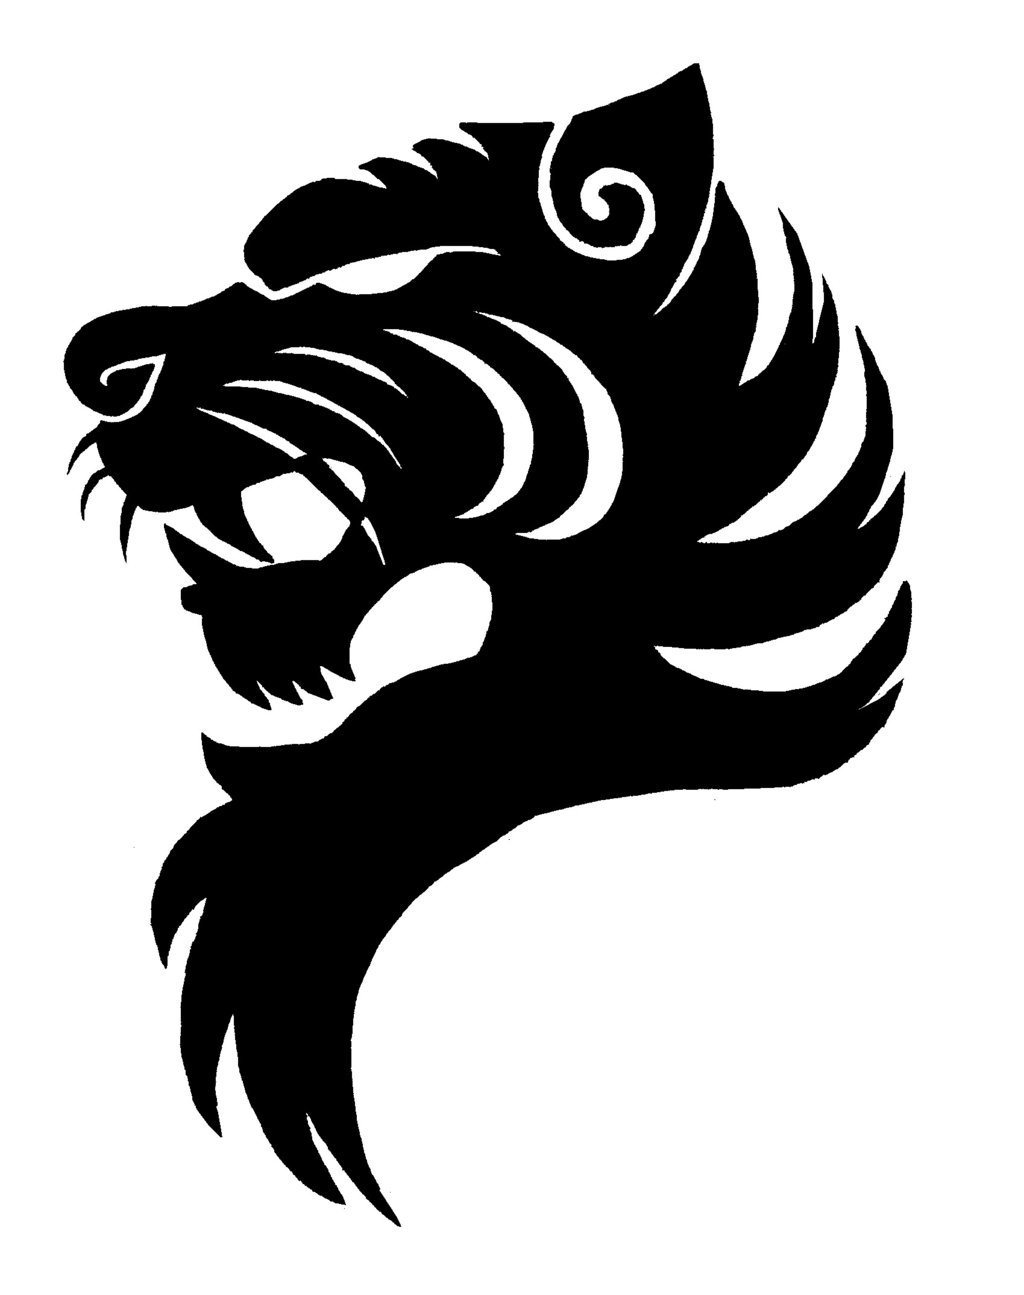 Tiger Logo Black And White | Clipart Panda - Free Clipart Images